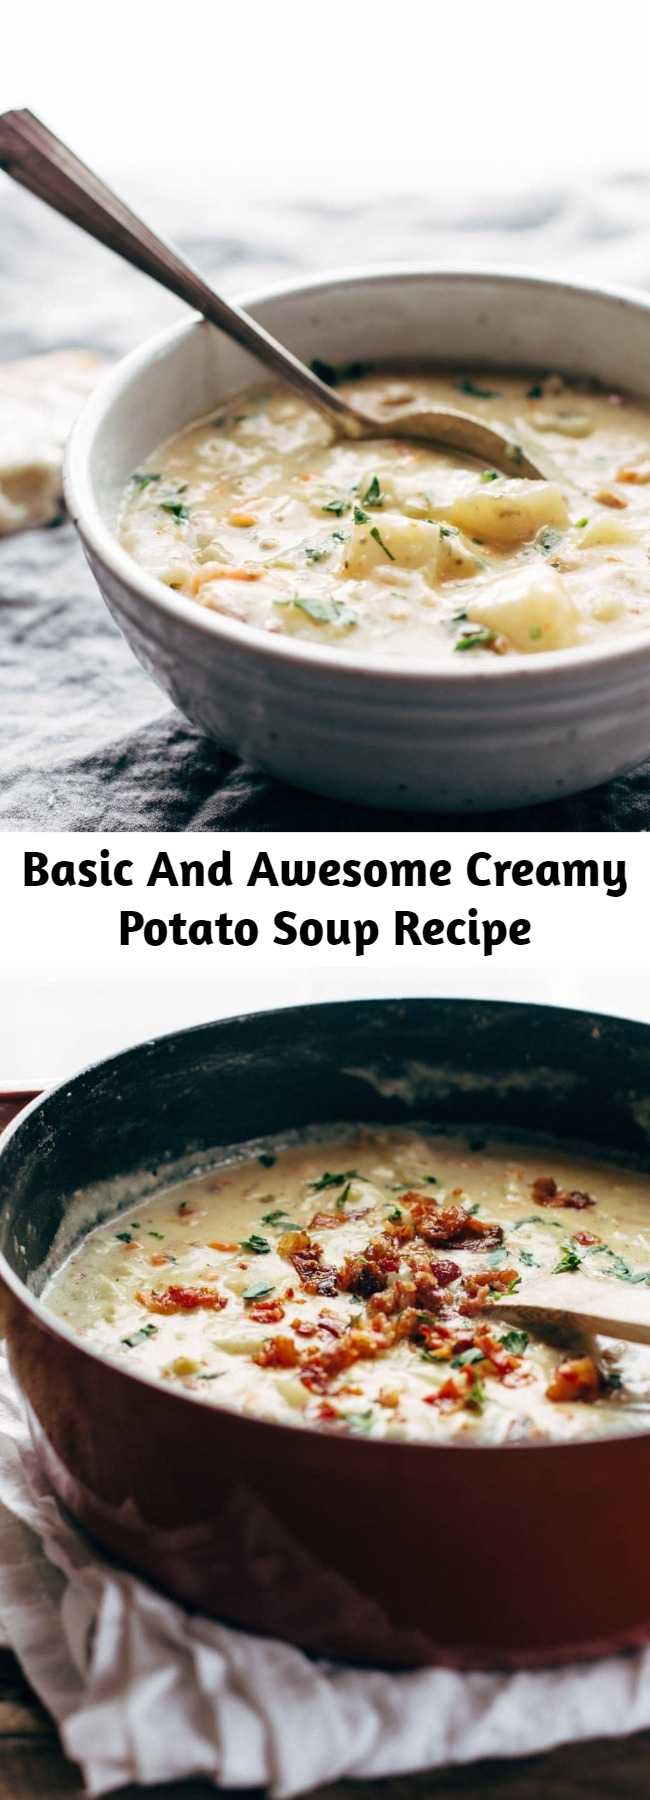 Creamy Potato Soup – so simple and all-homemade, with carrots, celery, potatoes, milk, butter, flour, and bacon. perfect comfort food with no canned cream-of-anything soups. #potatosoup #easyrecipe #dinnerrecipe #soup
